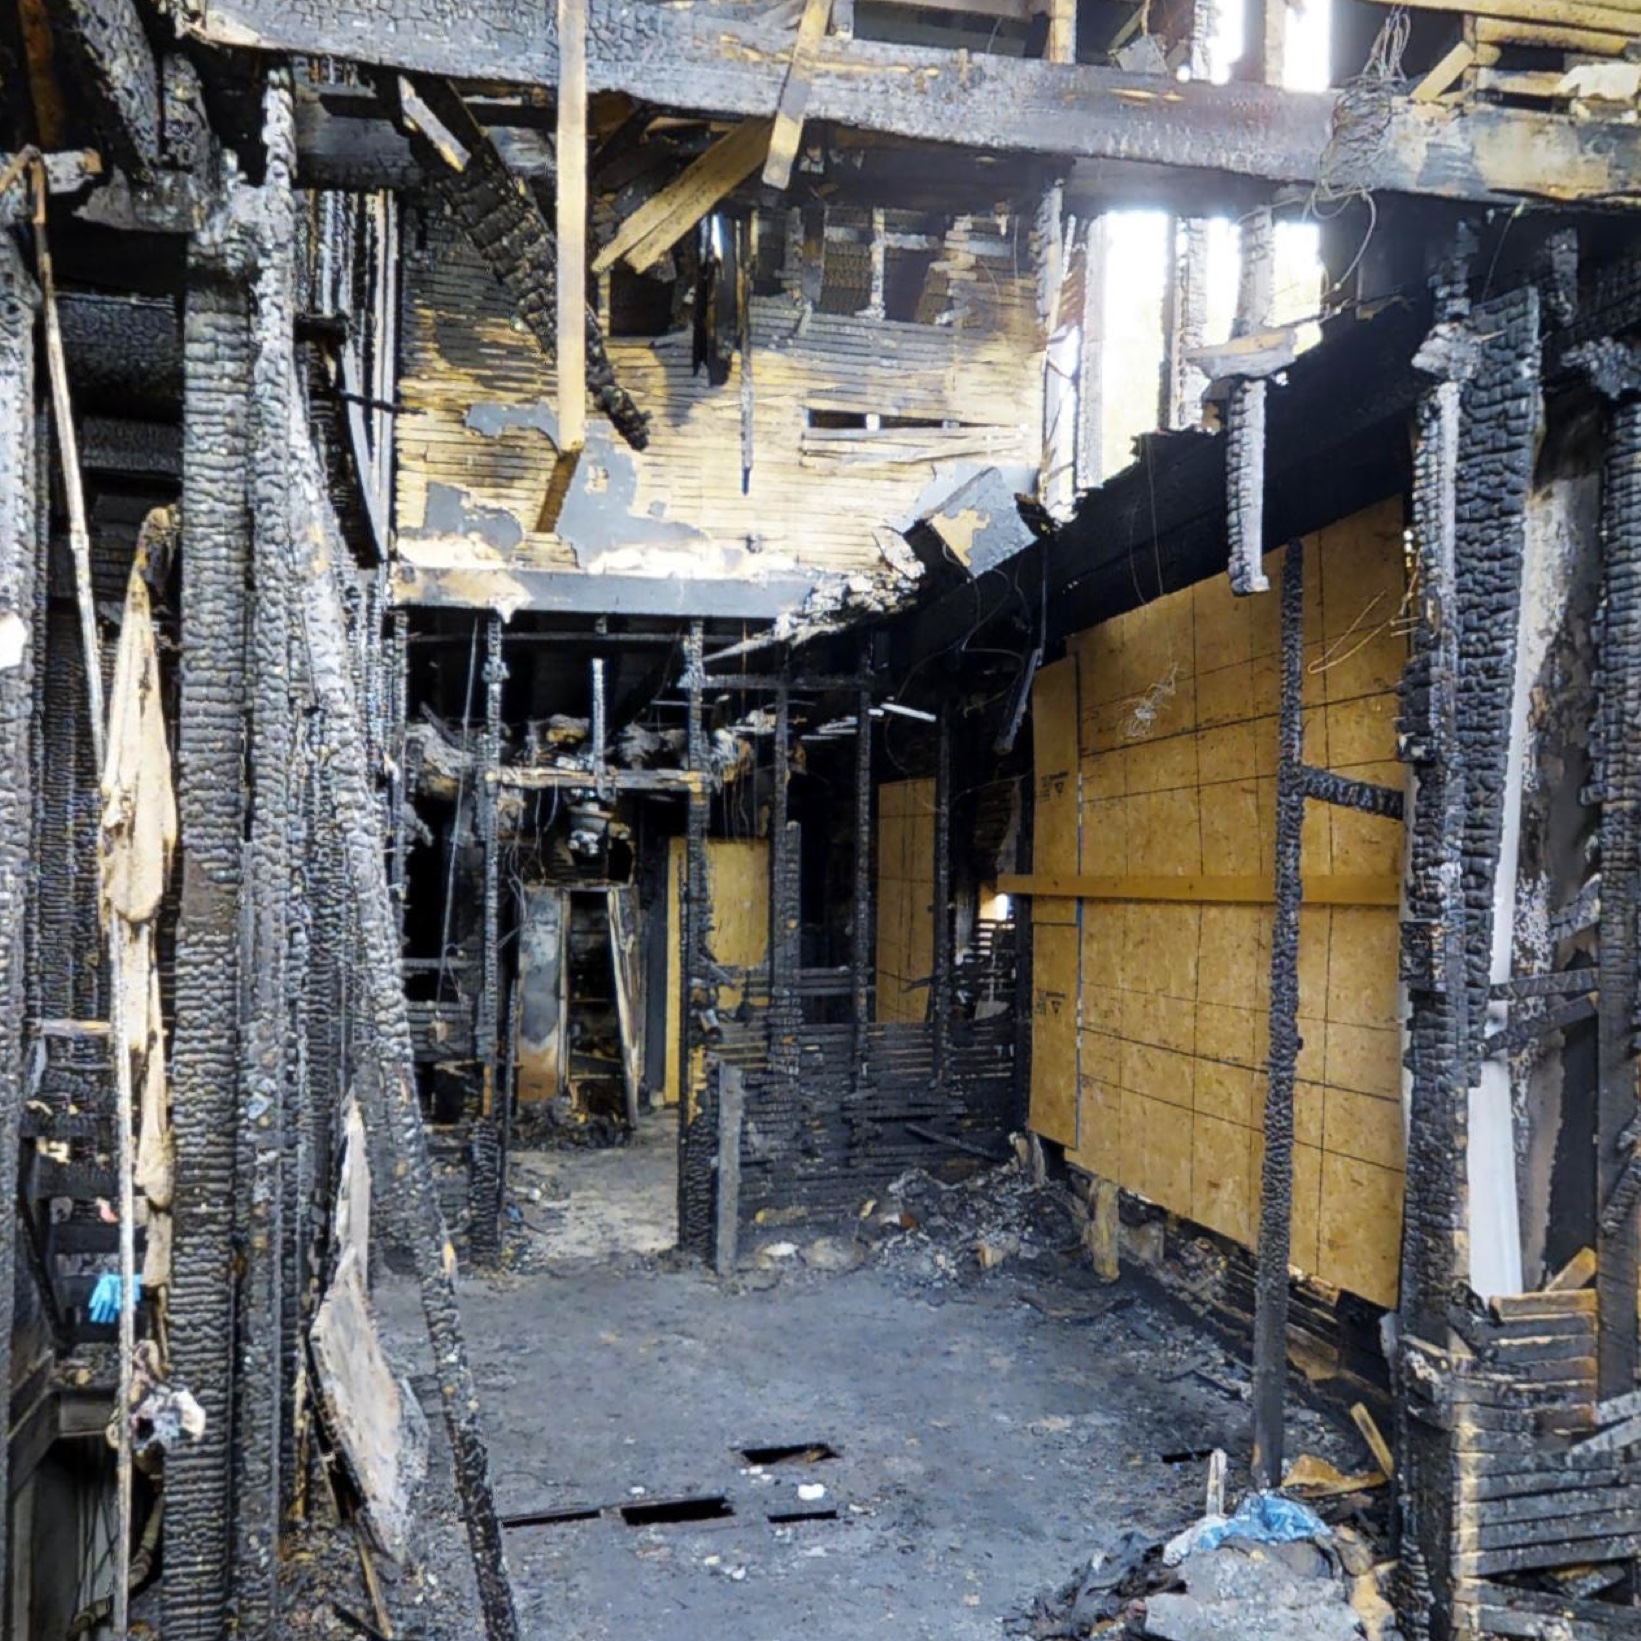 Extensive fire damage, from floor to ceiling